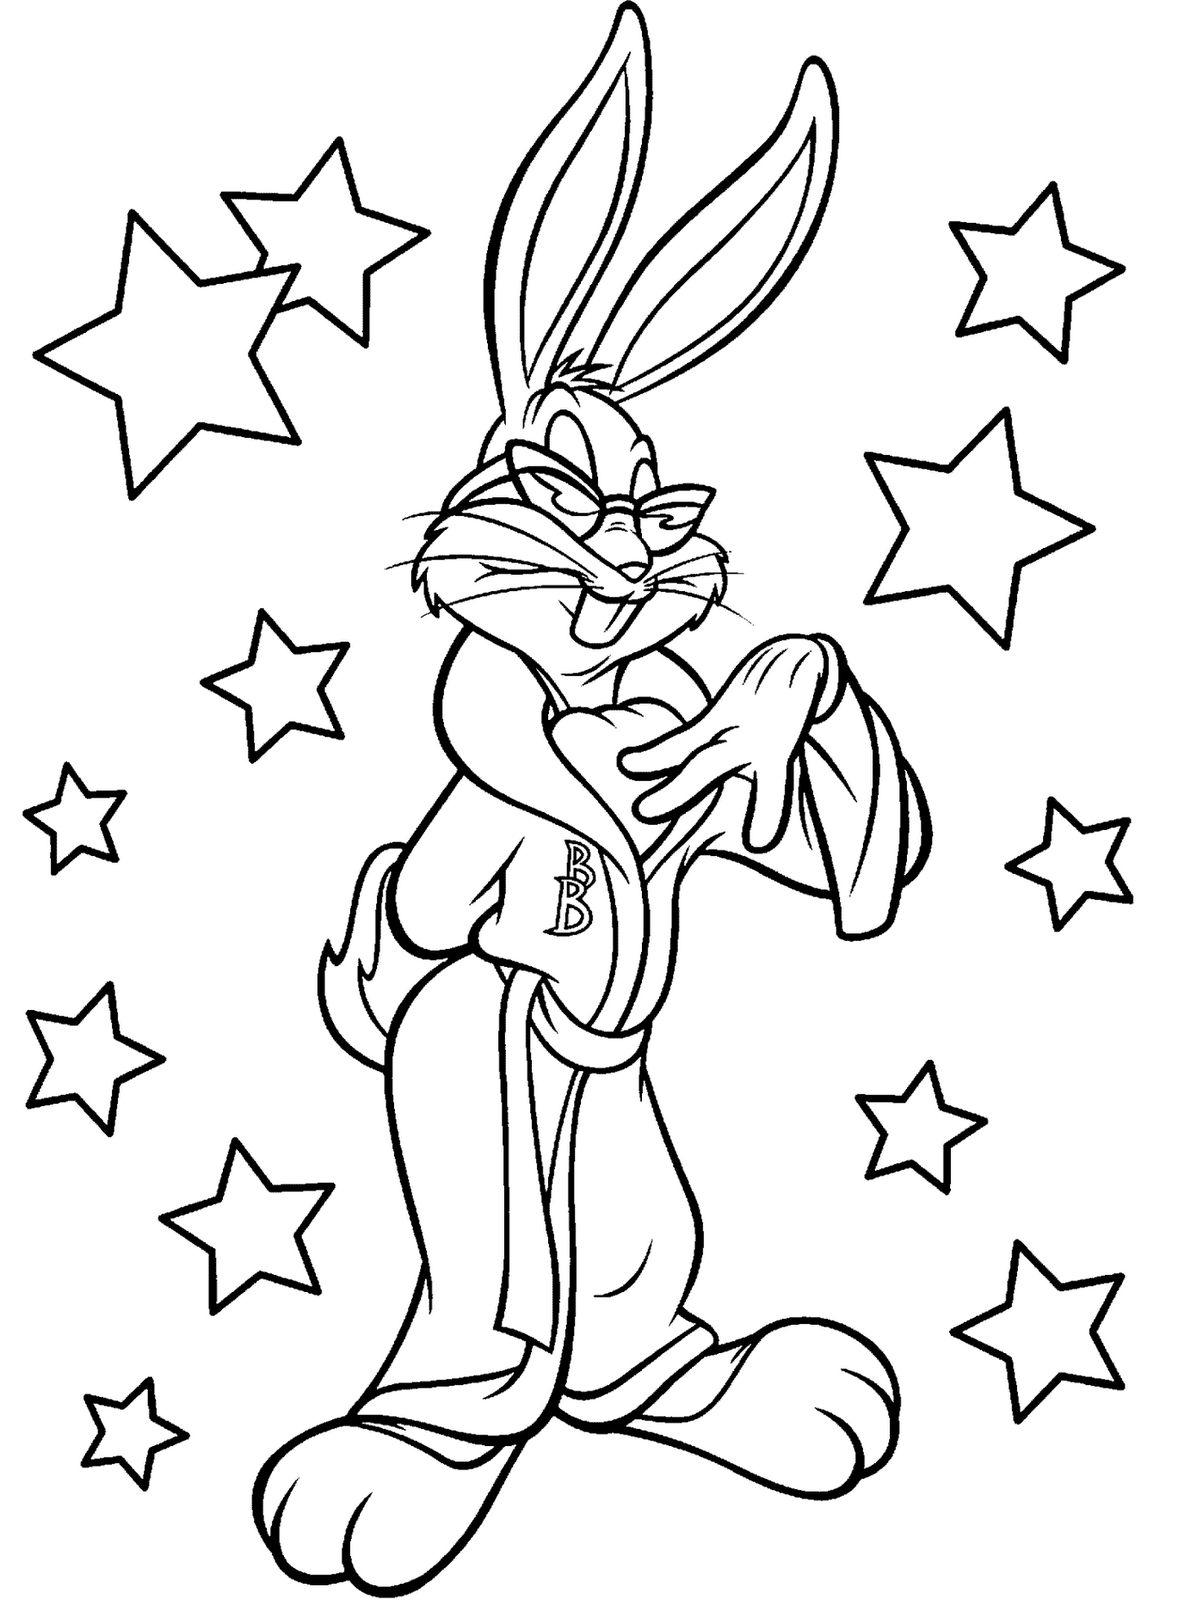 Download Bugs Bunny Coloring Pages | Team colors